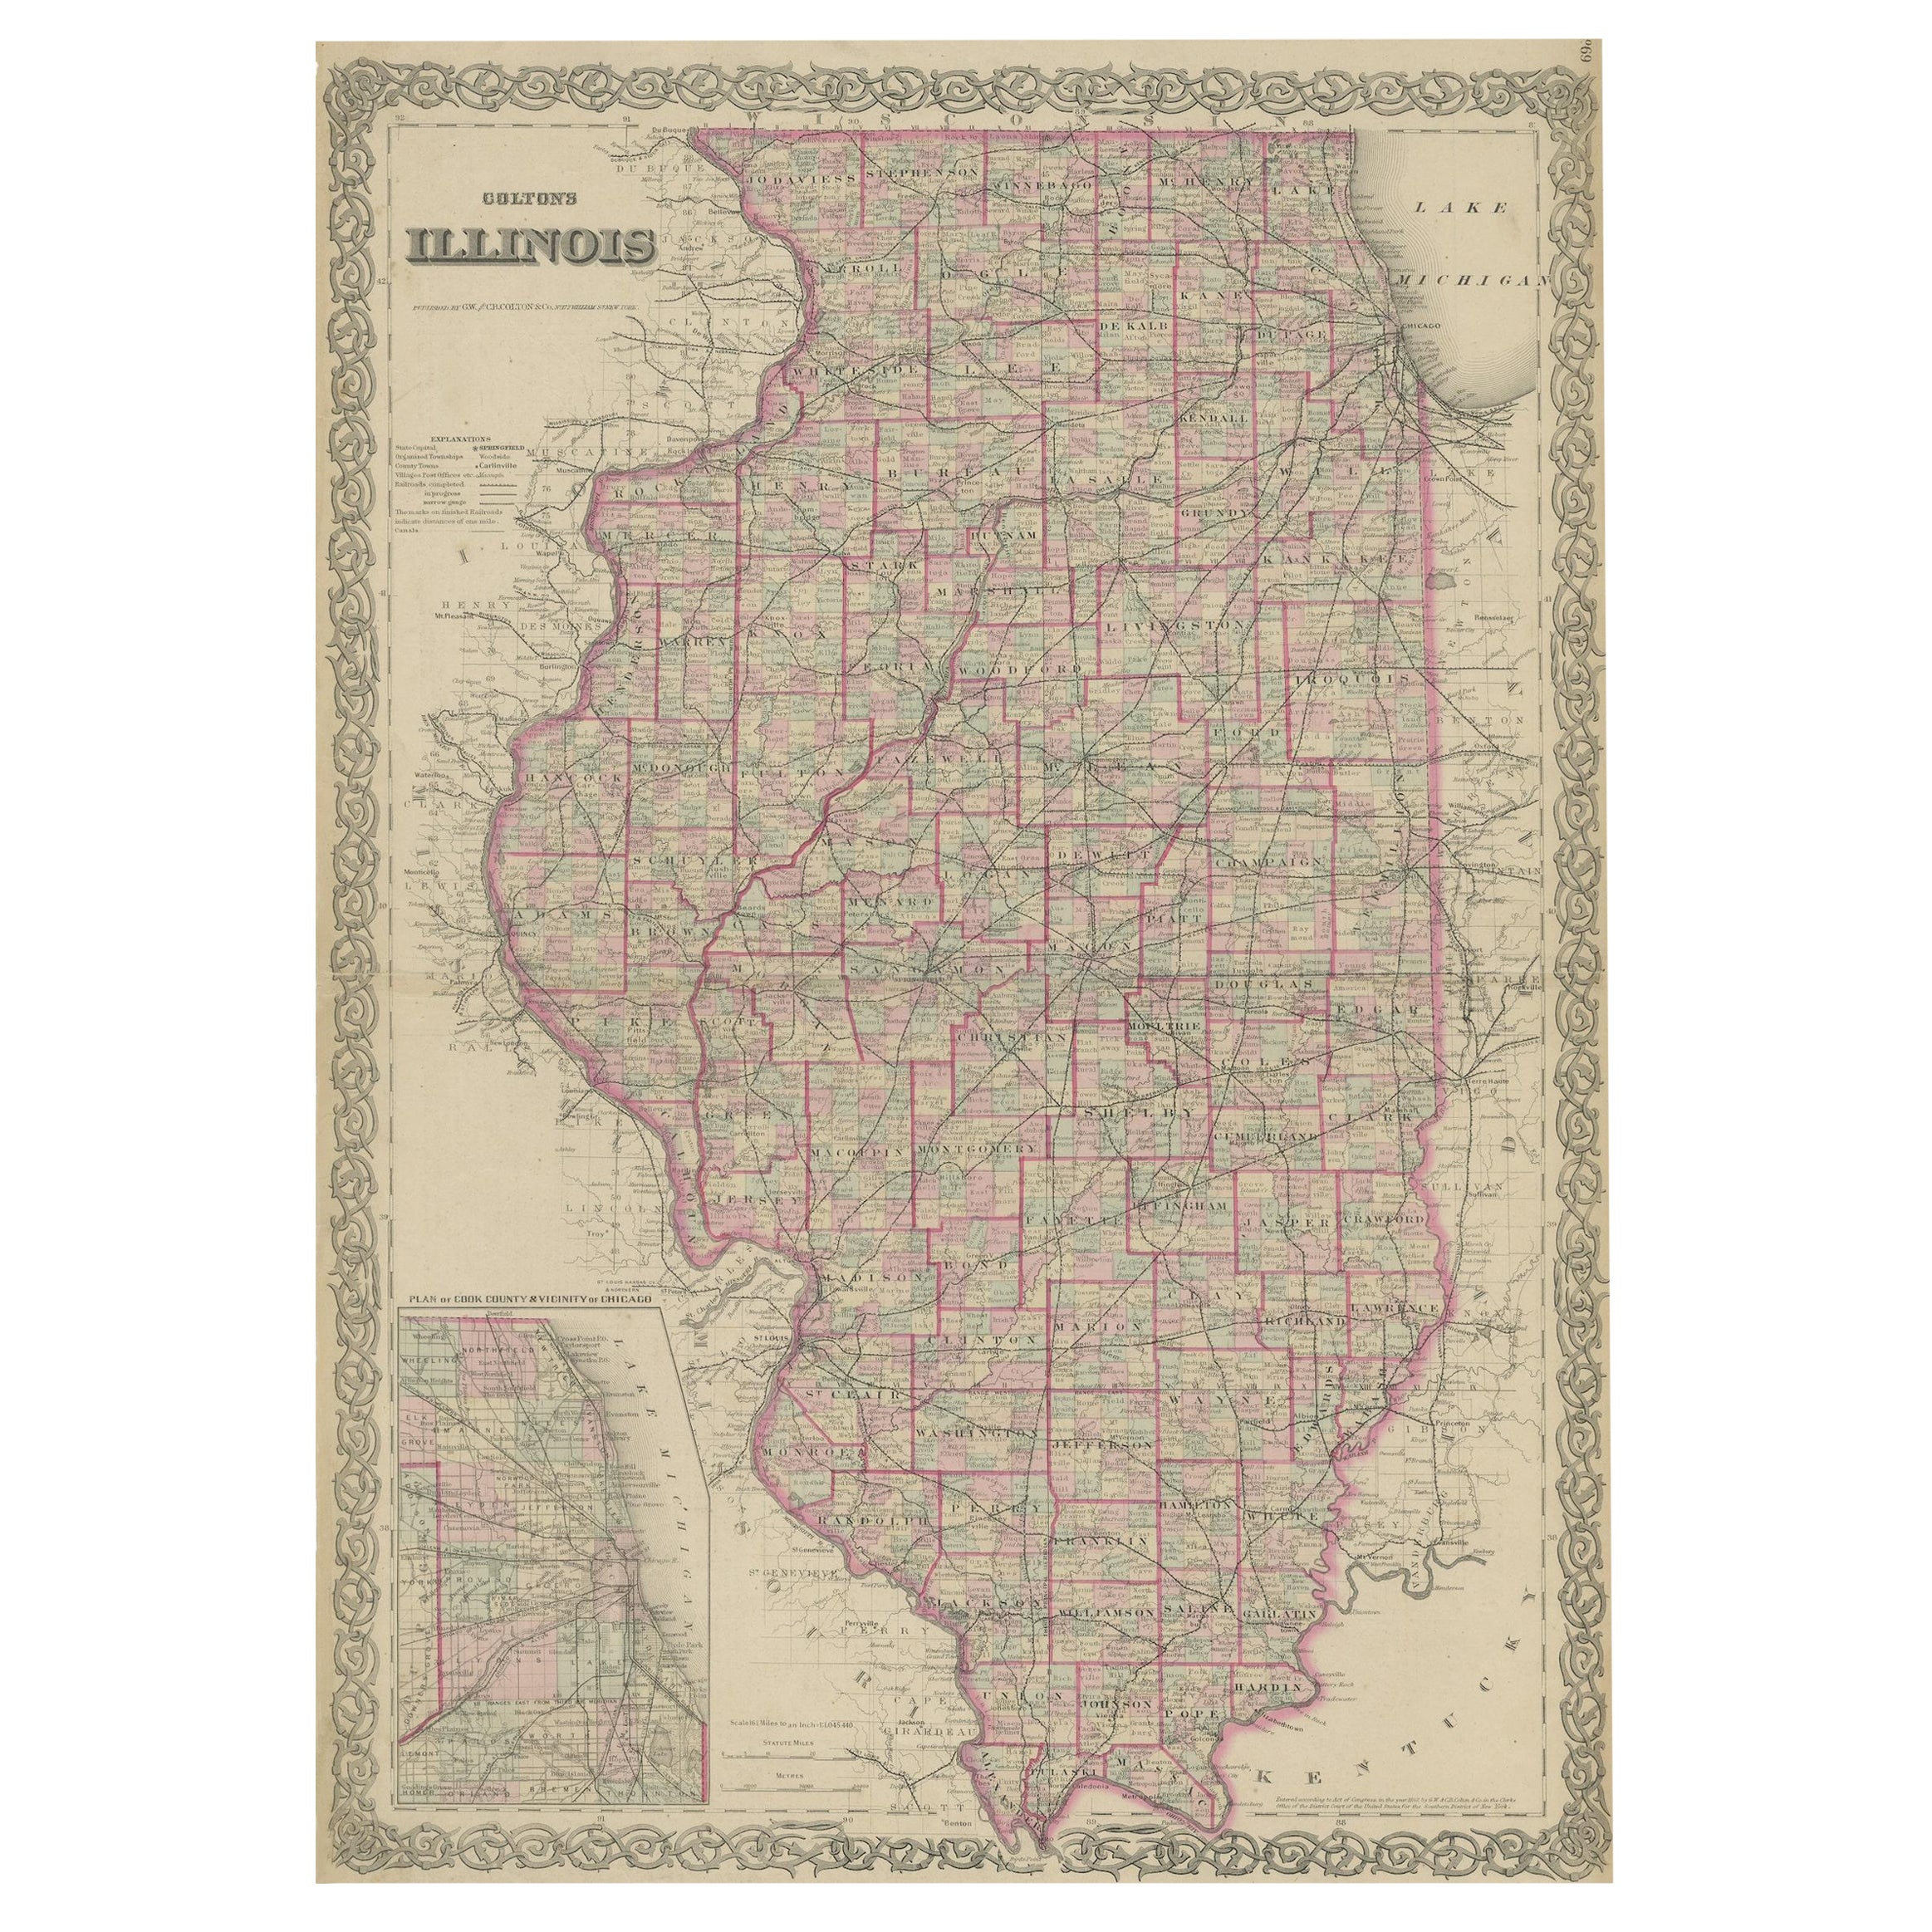 Colton's Map of Illinois, with an Inset of Chicago For Sale